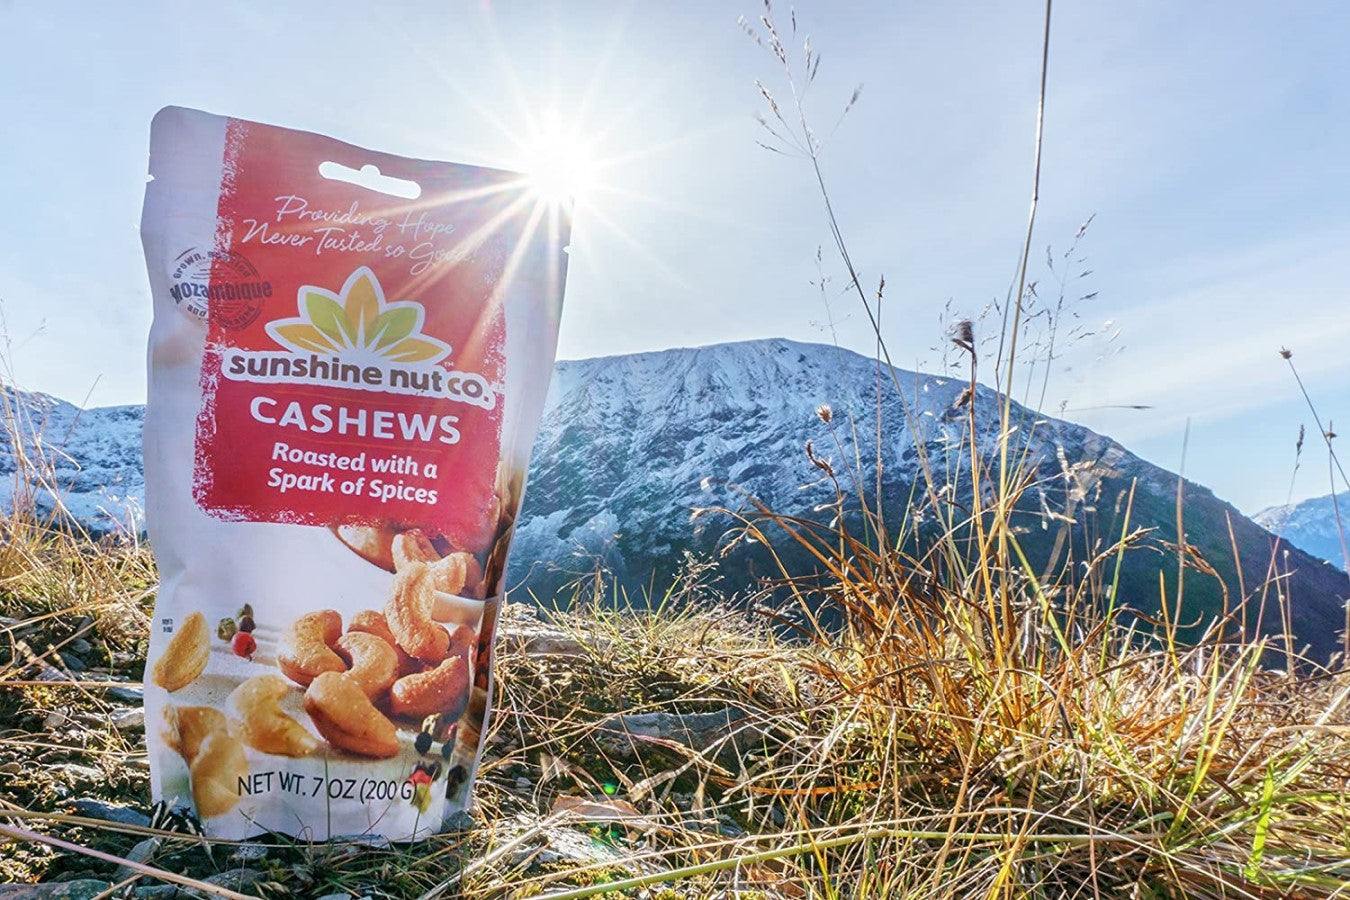 7 Ounce Sunshine Nut Co. Bag Of Cashews Roasted With A Spark Of Spices Sitting In Grass Near Mountains Outdoors In Sunshine